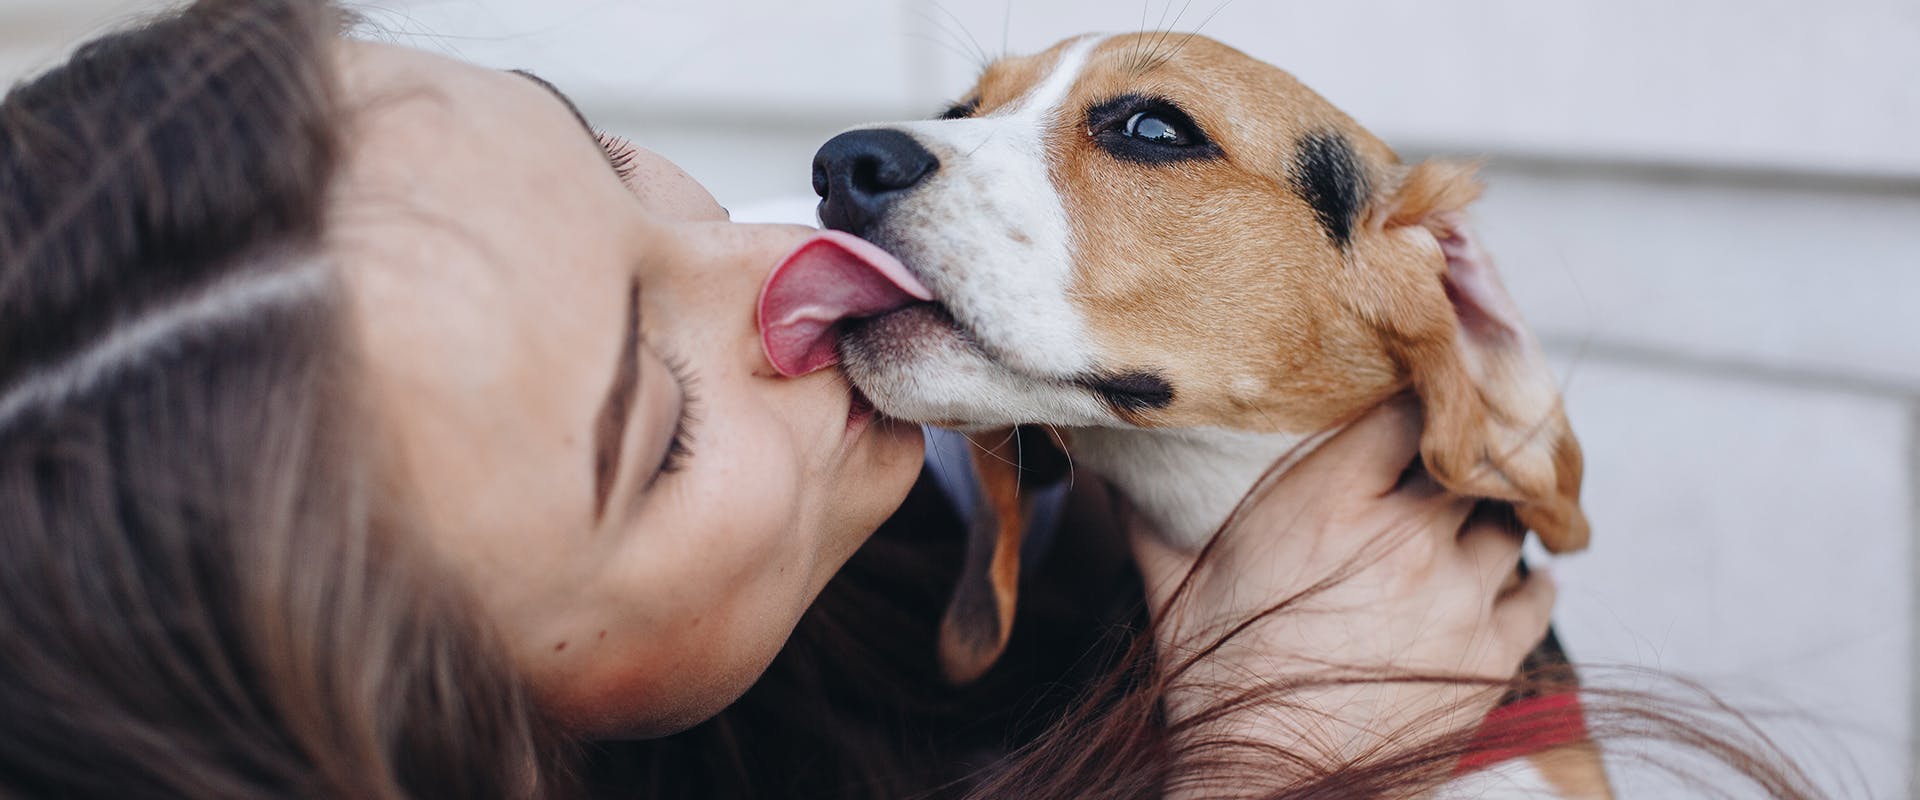 How to show your dog you love them: a dog licking a woman's face